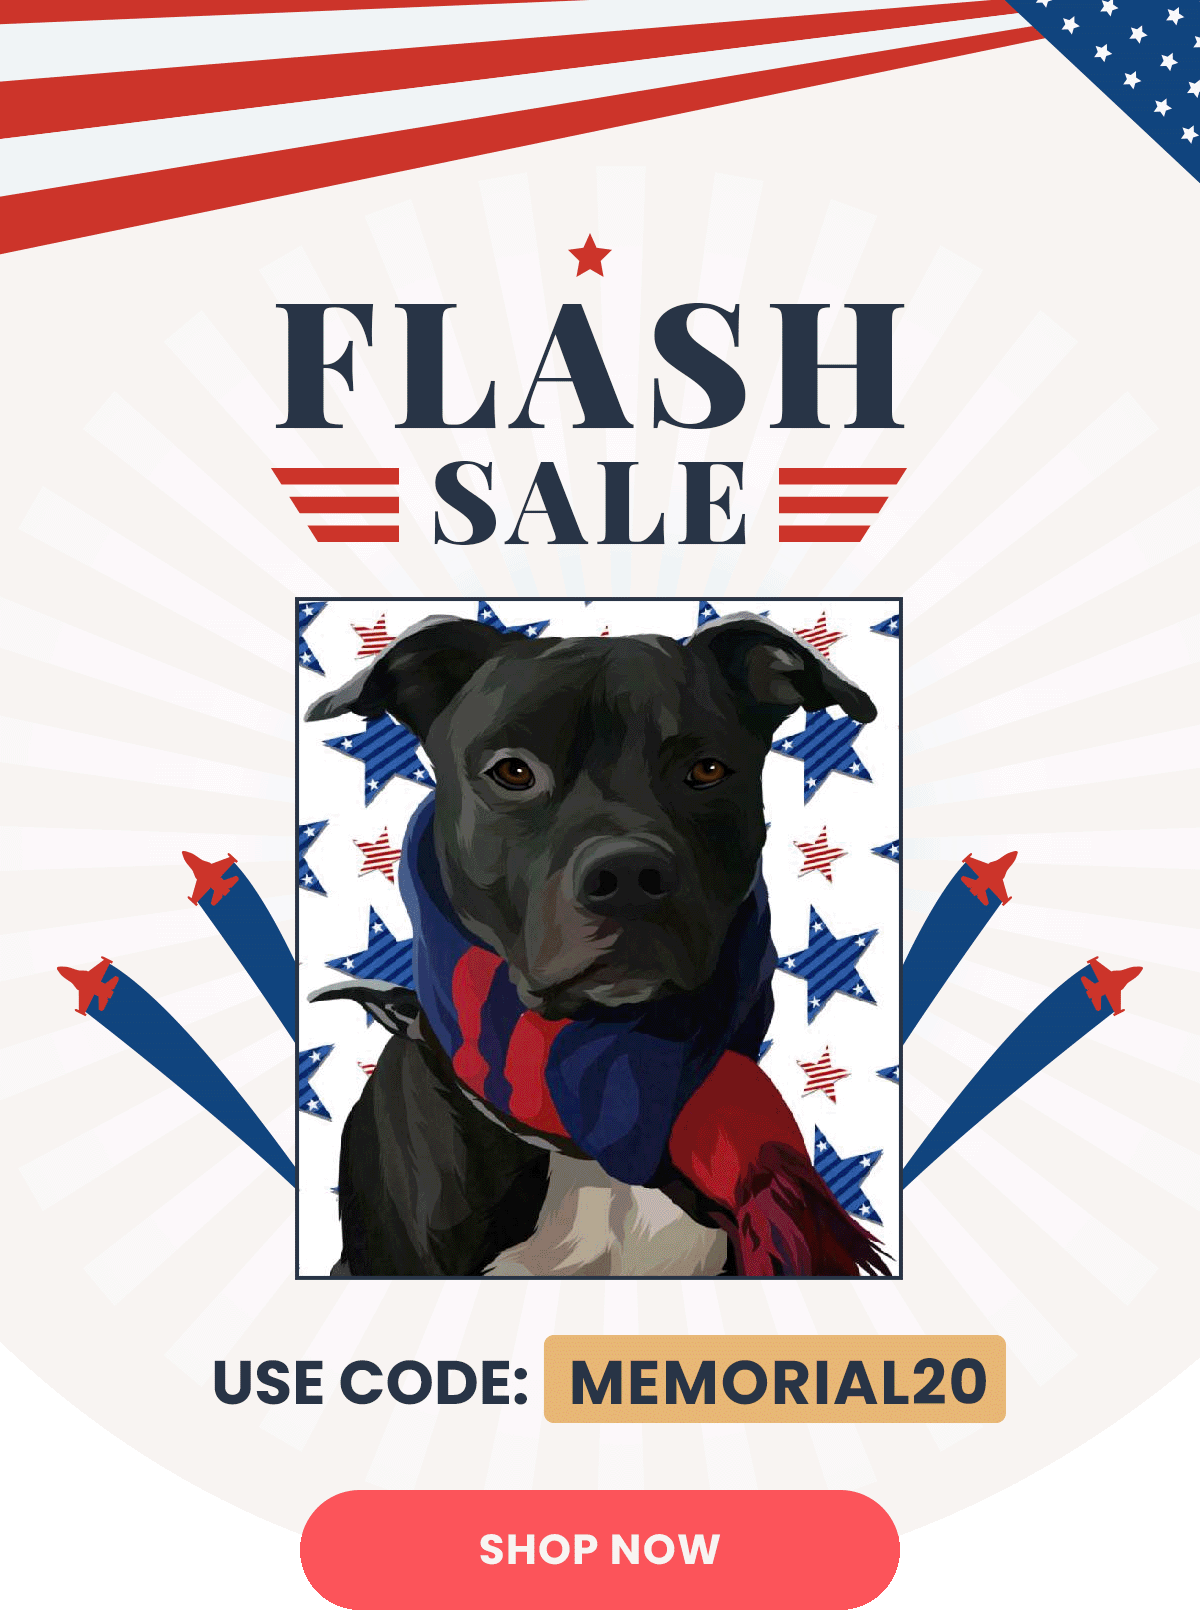 CLAIM YOUR DISCOUNT CODE: MEMORIAL20 - TURN ON IMAGES!